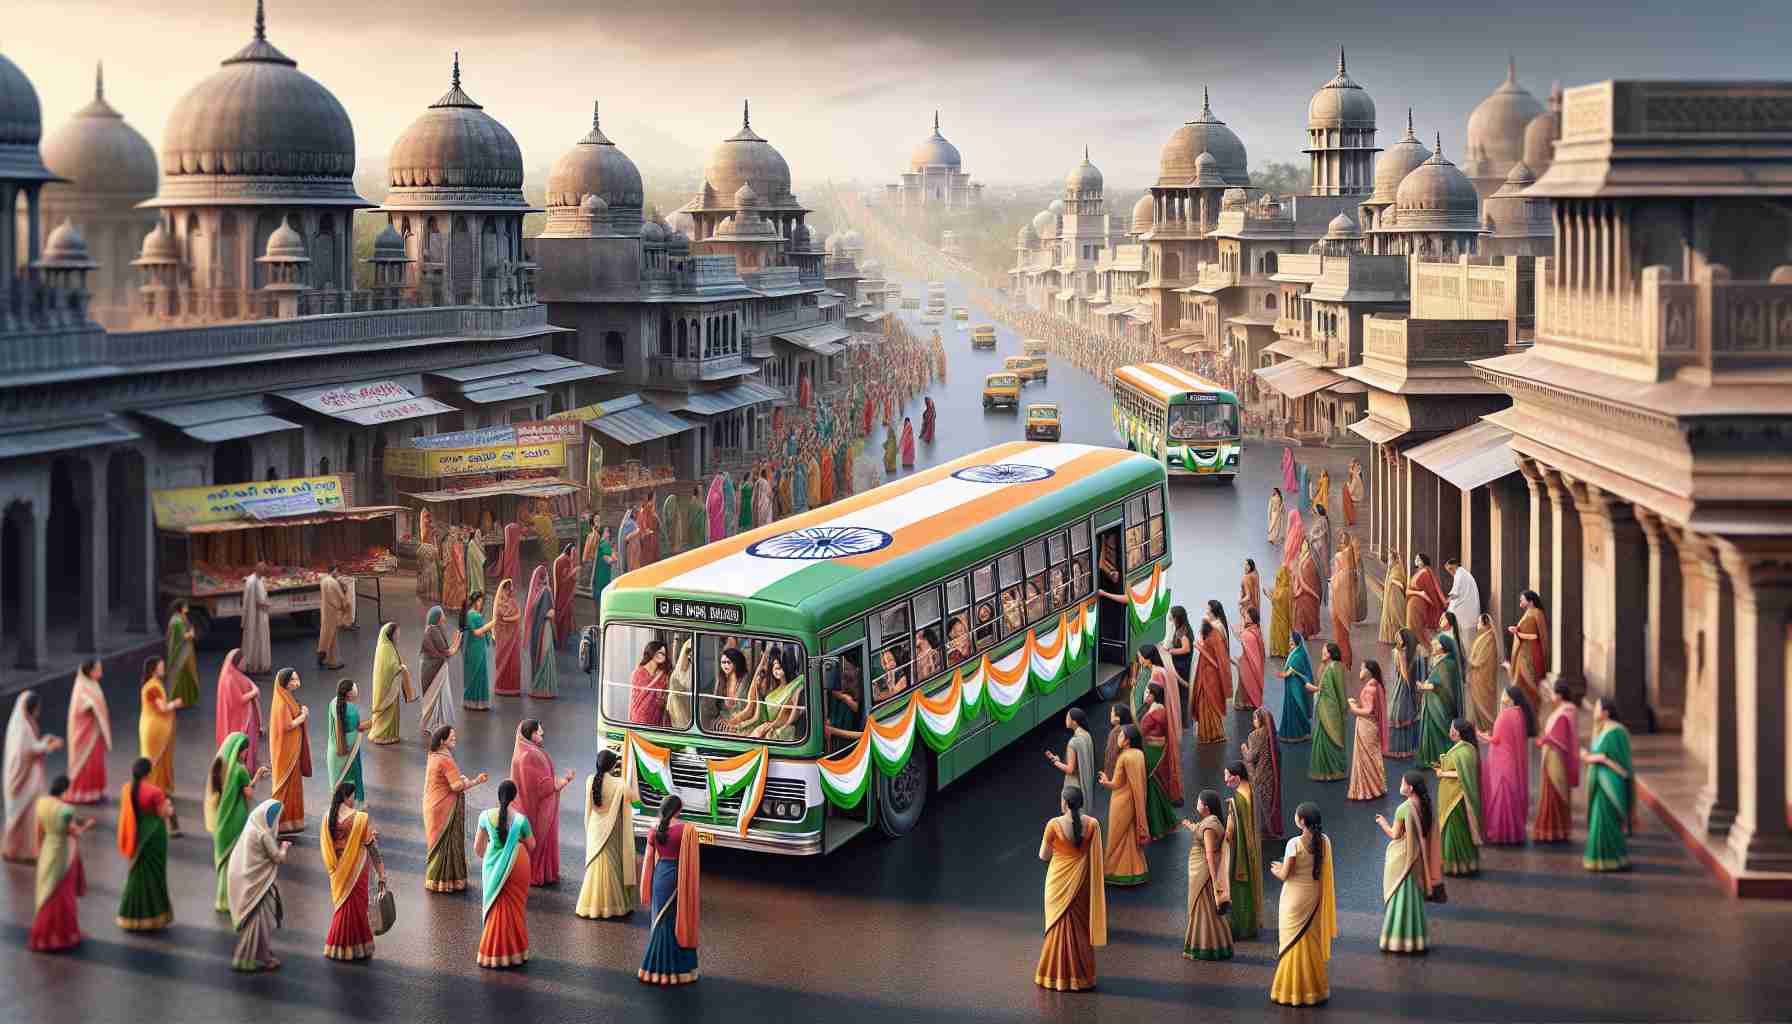 A realistic high-definition image displaying the scene of Andhra Pradesh, where free bus rides are being provided for women. The time is Independence Day, signifying a festive moment. The buses are decorated with tri-color ribbons, signaling the celebration of national spirit. The women, of various descents such as South Asian, Middle-Eastern, and Caucasian, are happily boarding the buses, reflecting the joy of the occasion. The landscape backdrop reveals the unique architecture and vibrant culture of the region. The streets are bustling with activity with vendors selling flag-themed merchandise, signifying commemoration of the day.